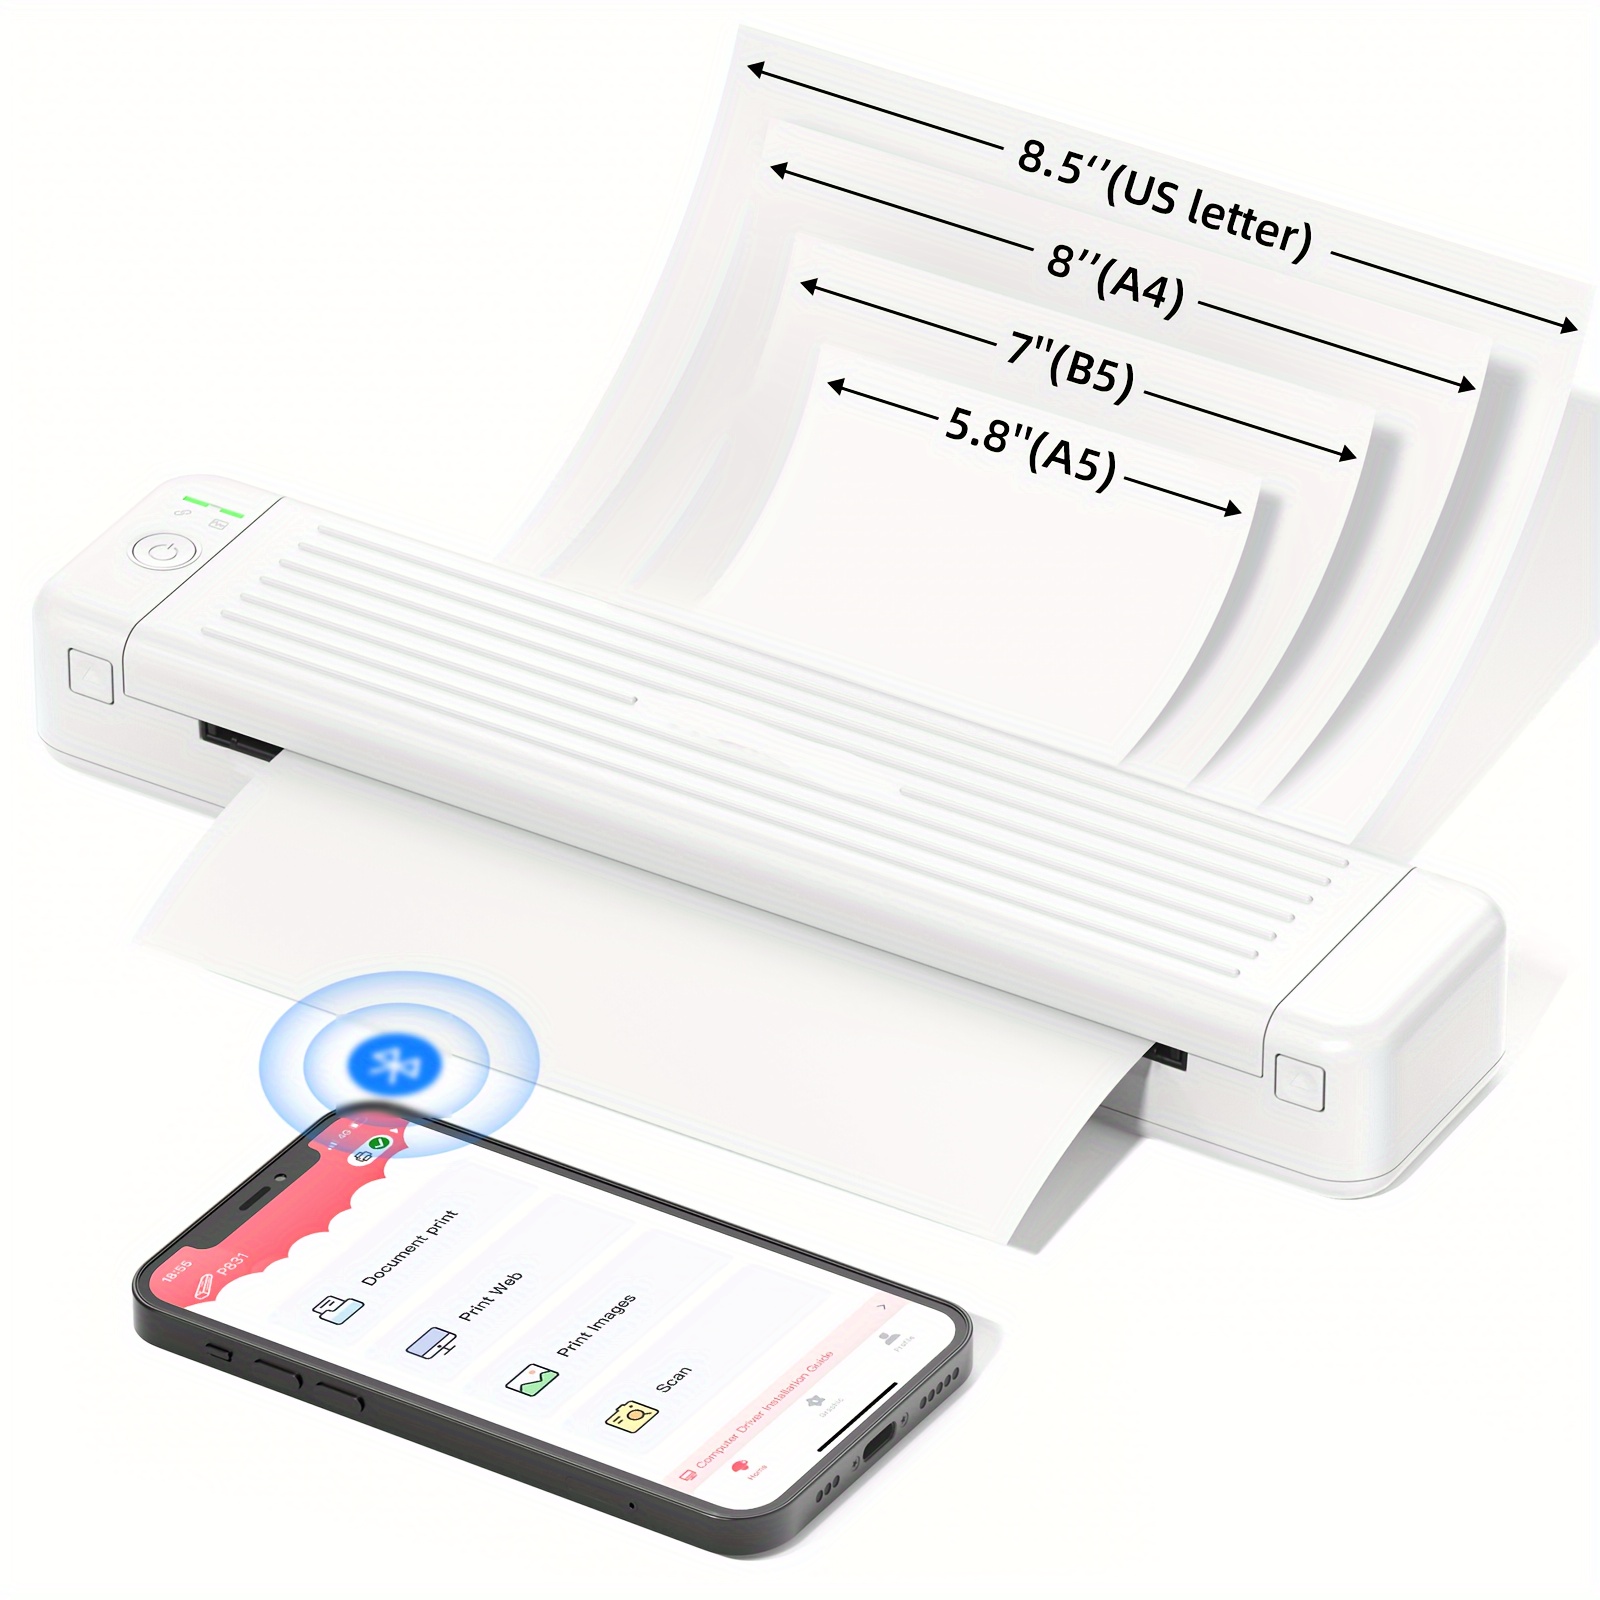 HPRT MT810 Portable Printer, A4 Wireless Bluetooth Travel Printer, Thermal  Printer Support 8 & 4 Thermal Roll Paper Suitable for Home Vehincles